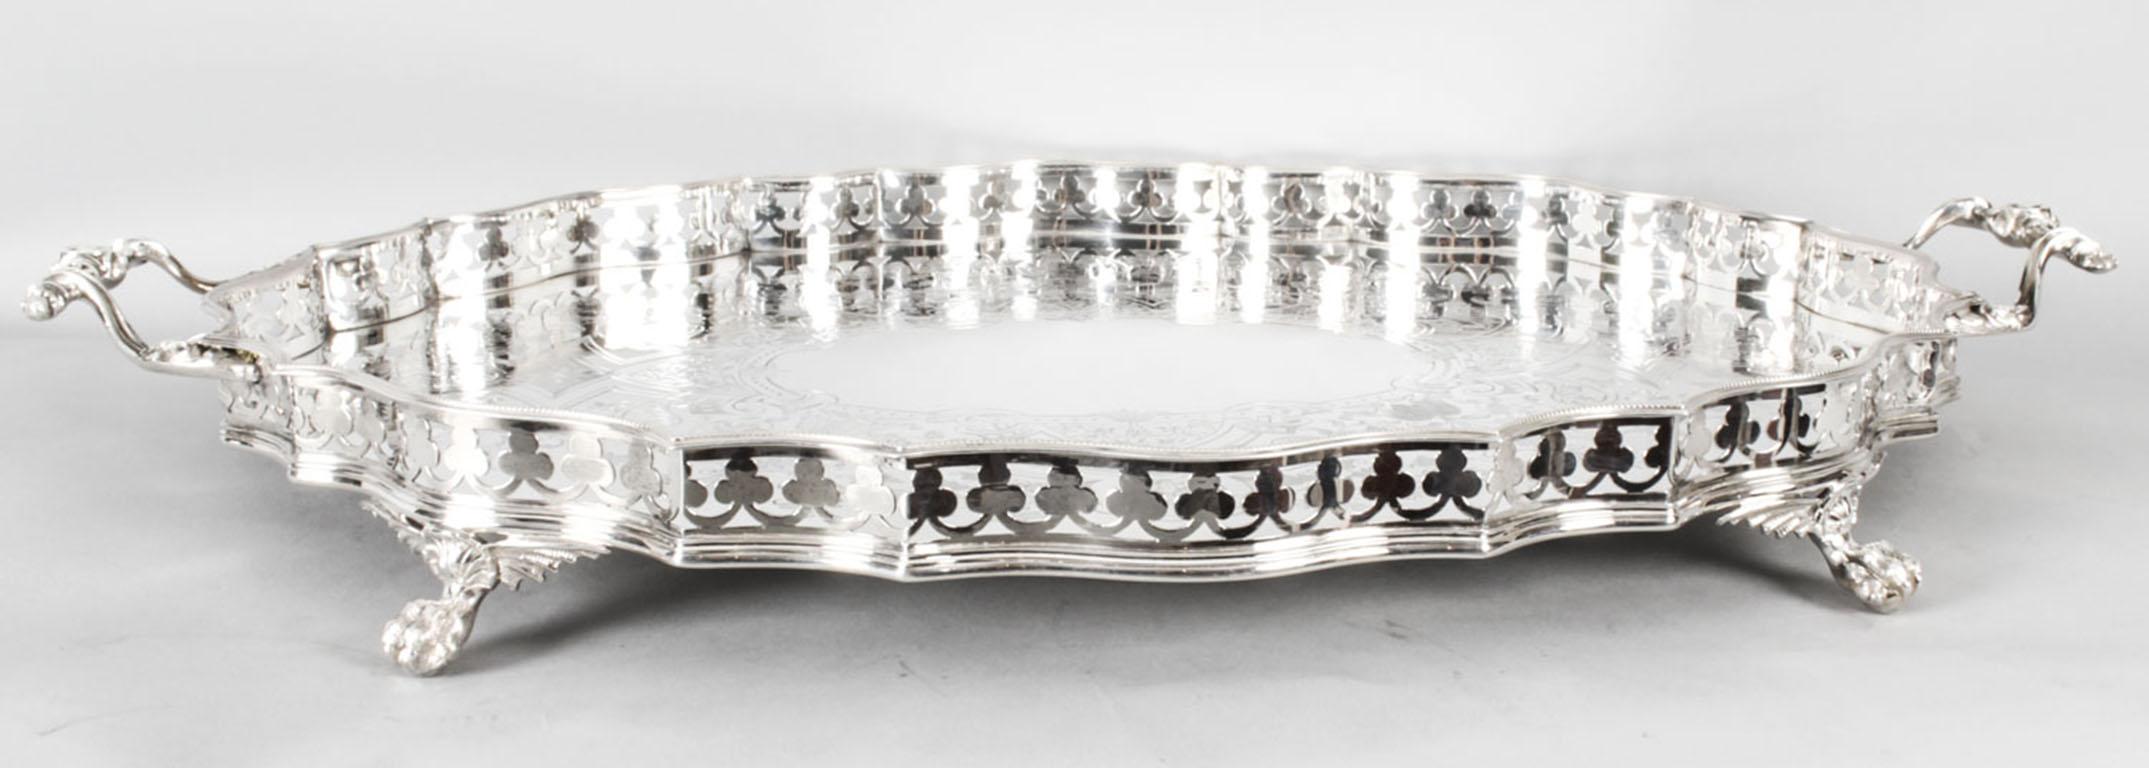 Antique Victorian Oval Silver Plated Gallery Tray, 19th Century 9